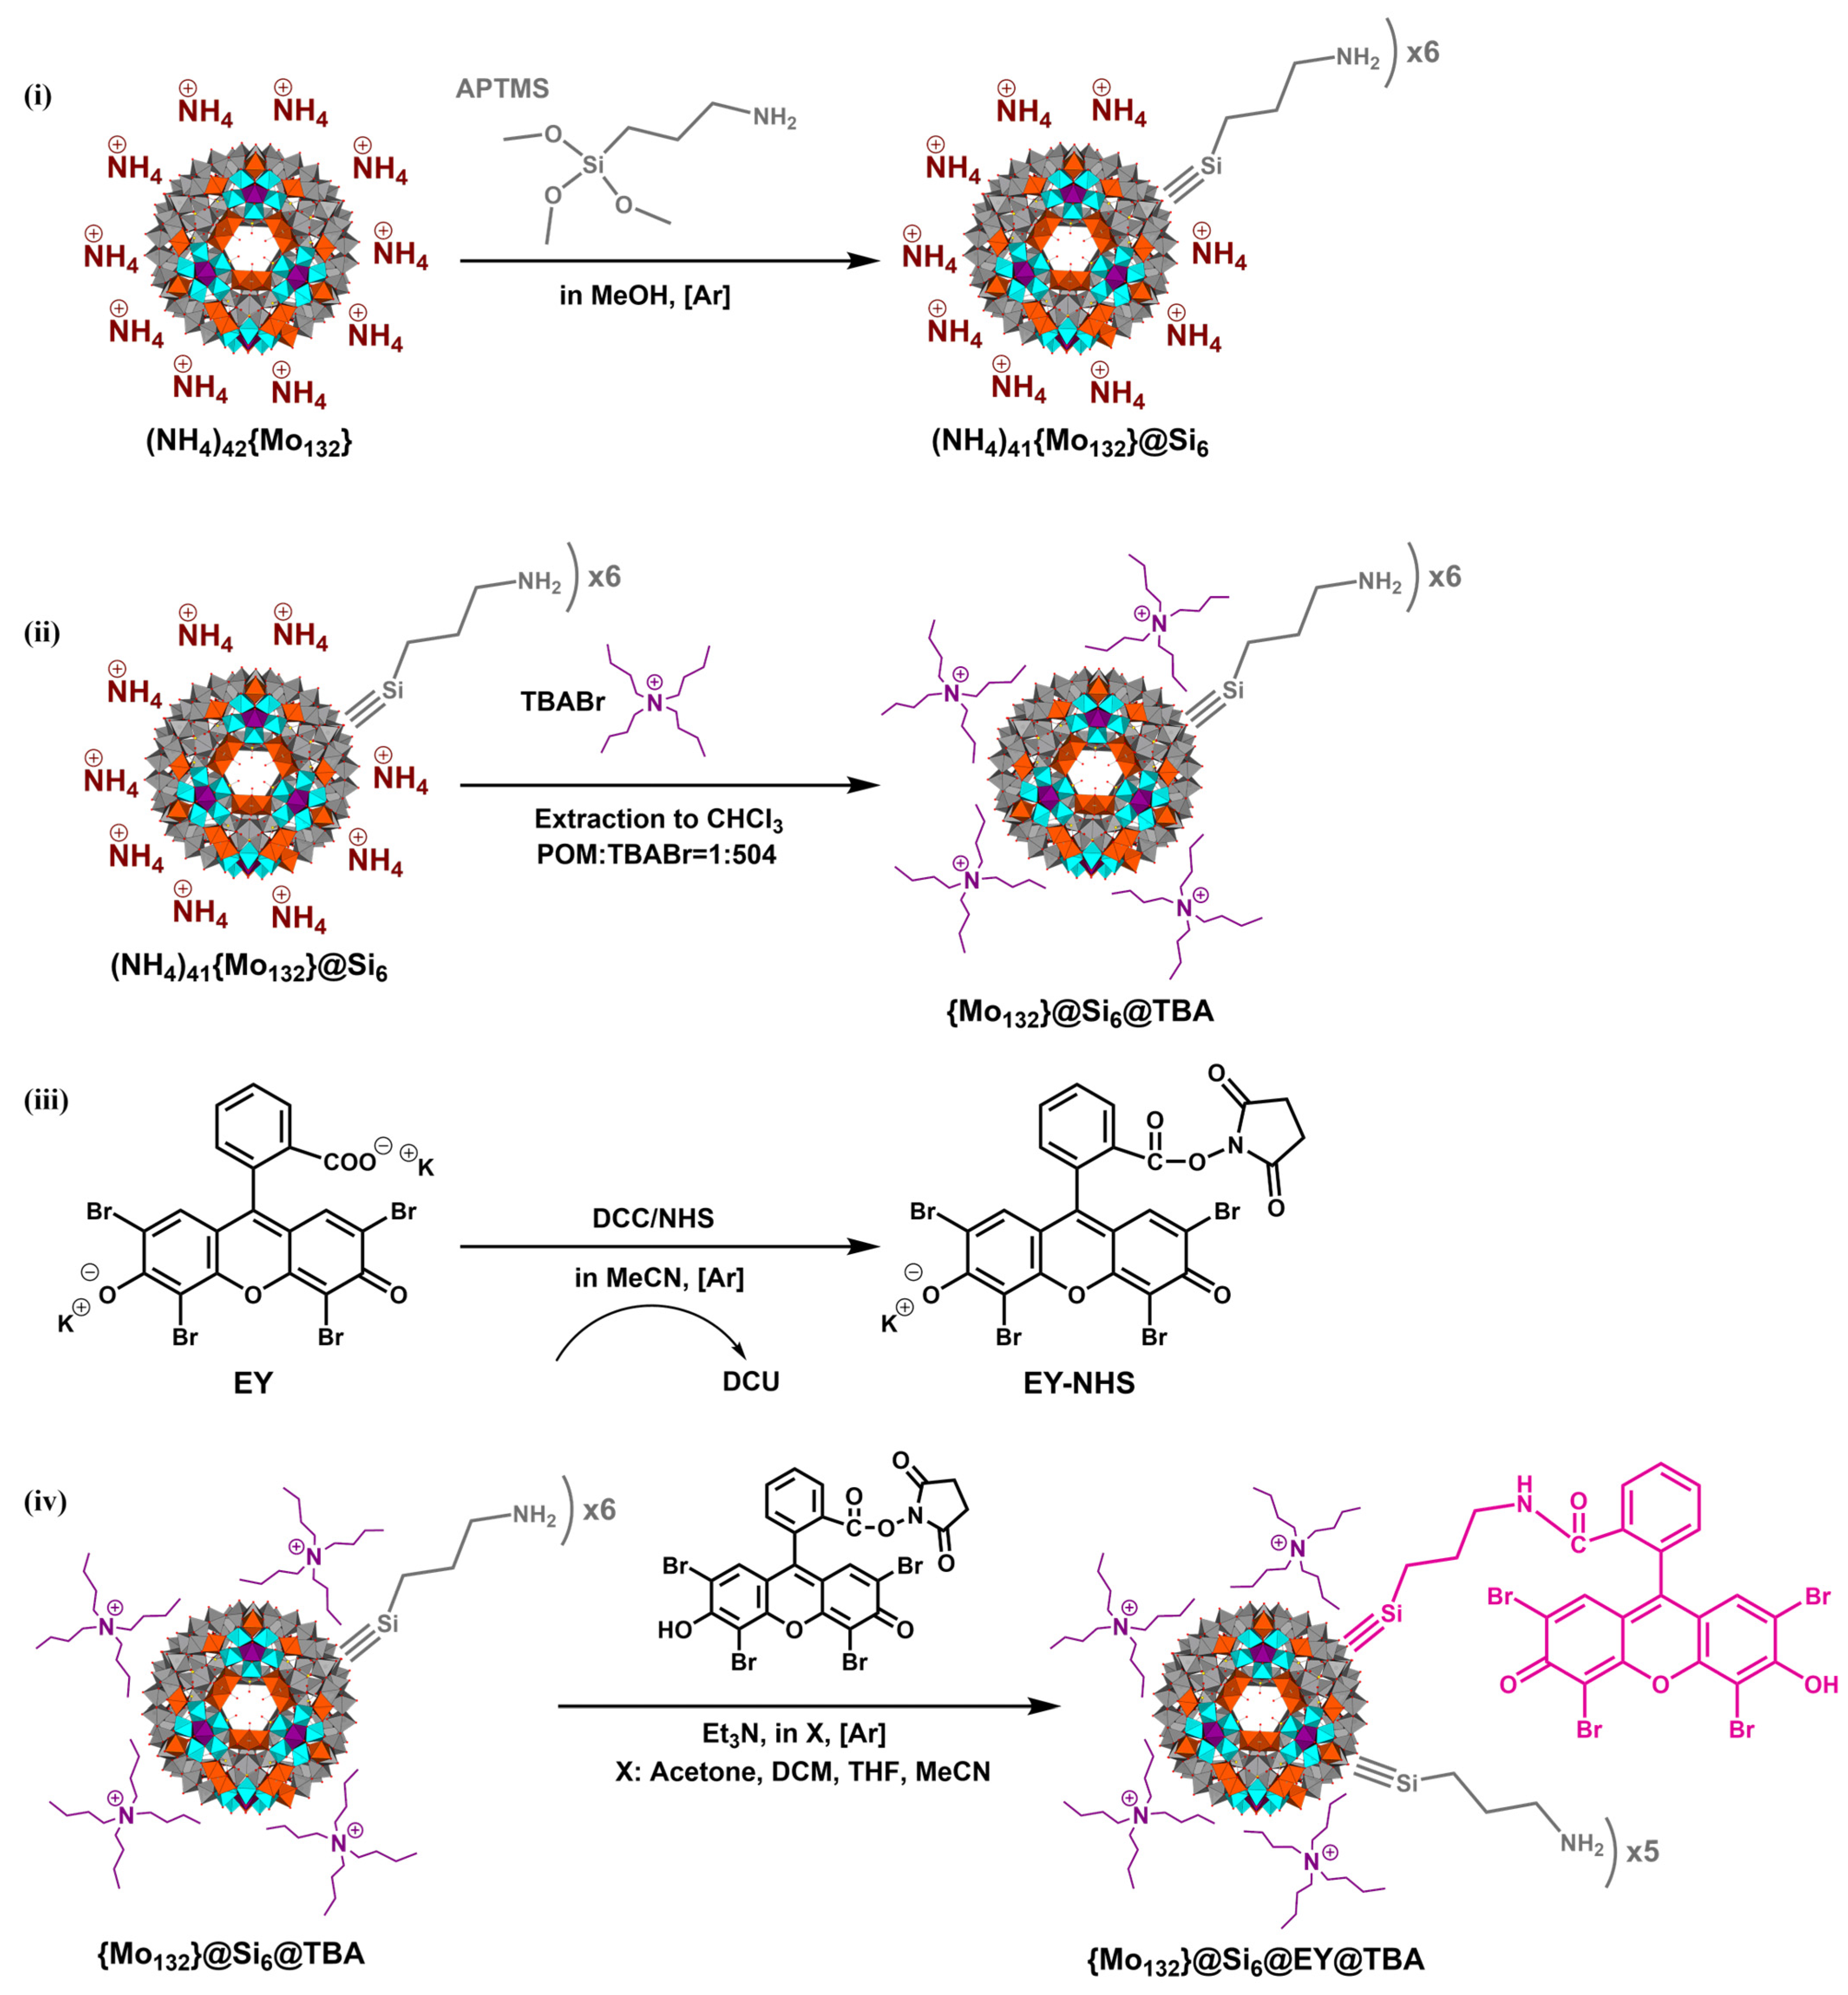 Bifunctional diazirine reagent for covalent dyeing of Kevlar and inert  polymer materials - Polymer Chemistry (RSC Publishing)  DOI:10.1039/D3PY00907F